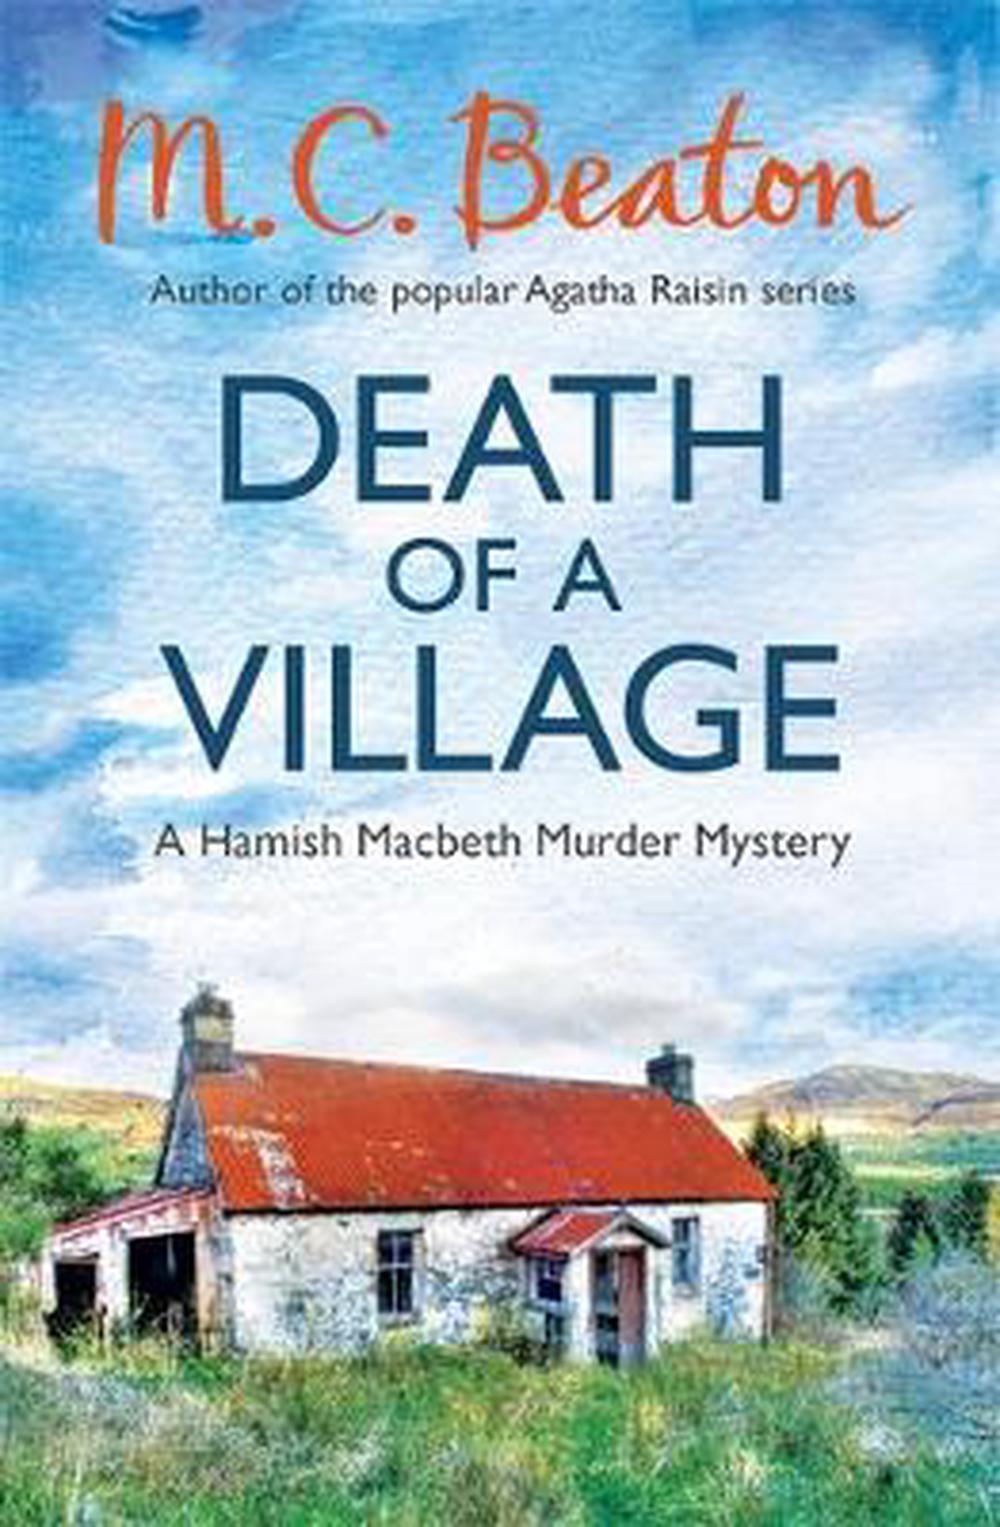 Death of a Village by M C Beaton (English) Paperback Book